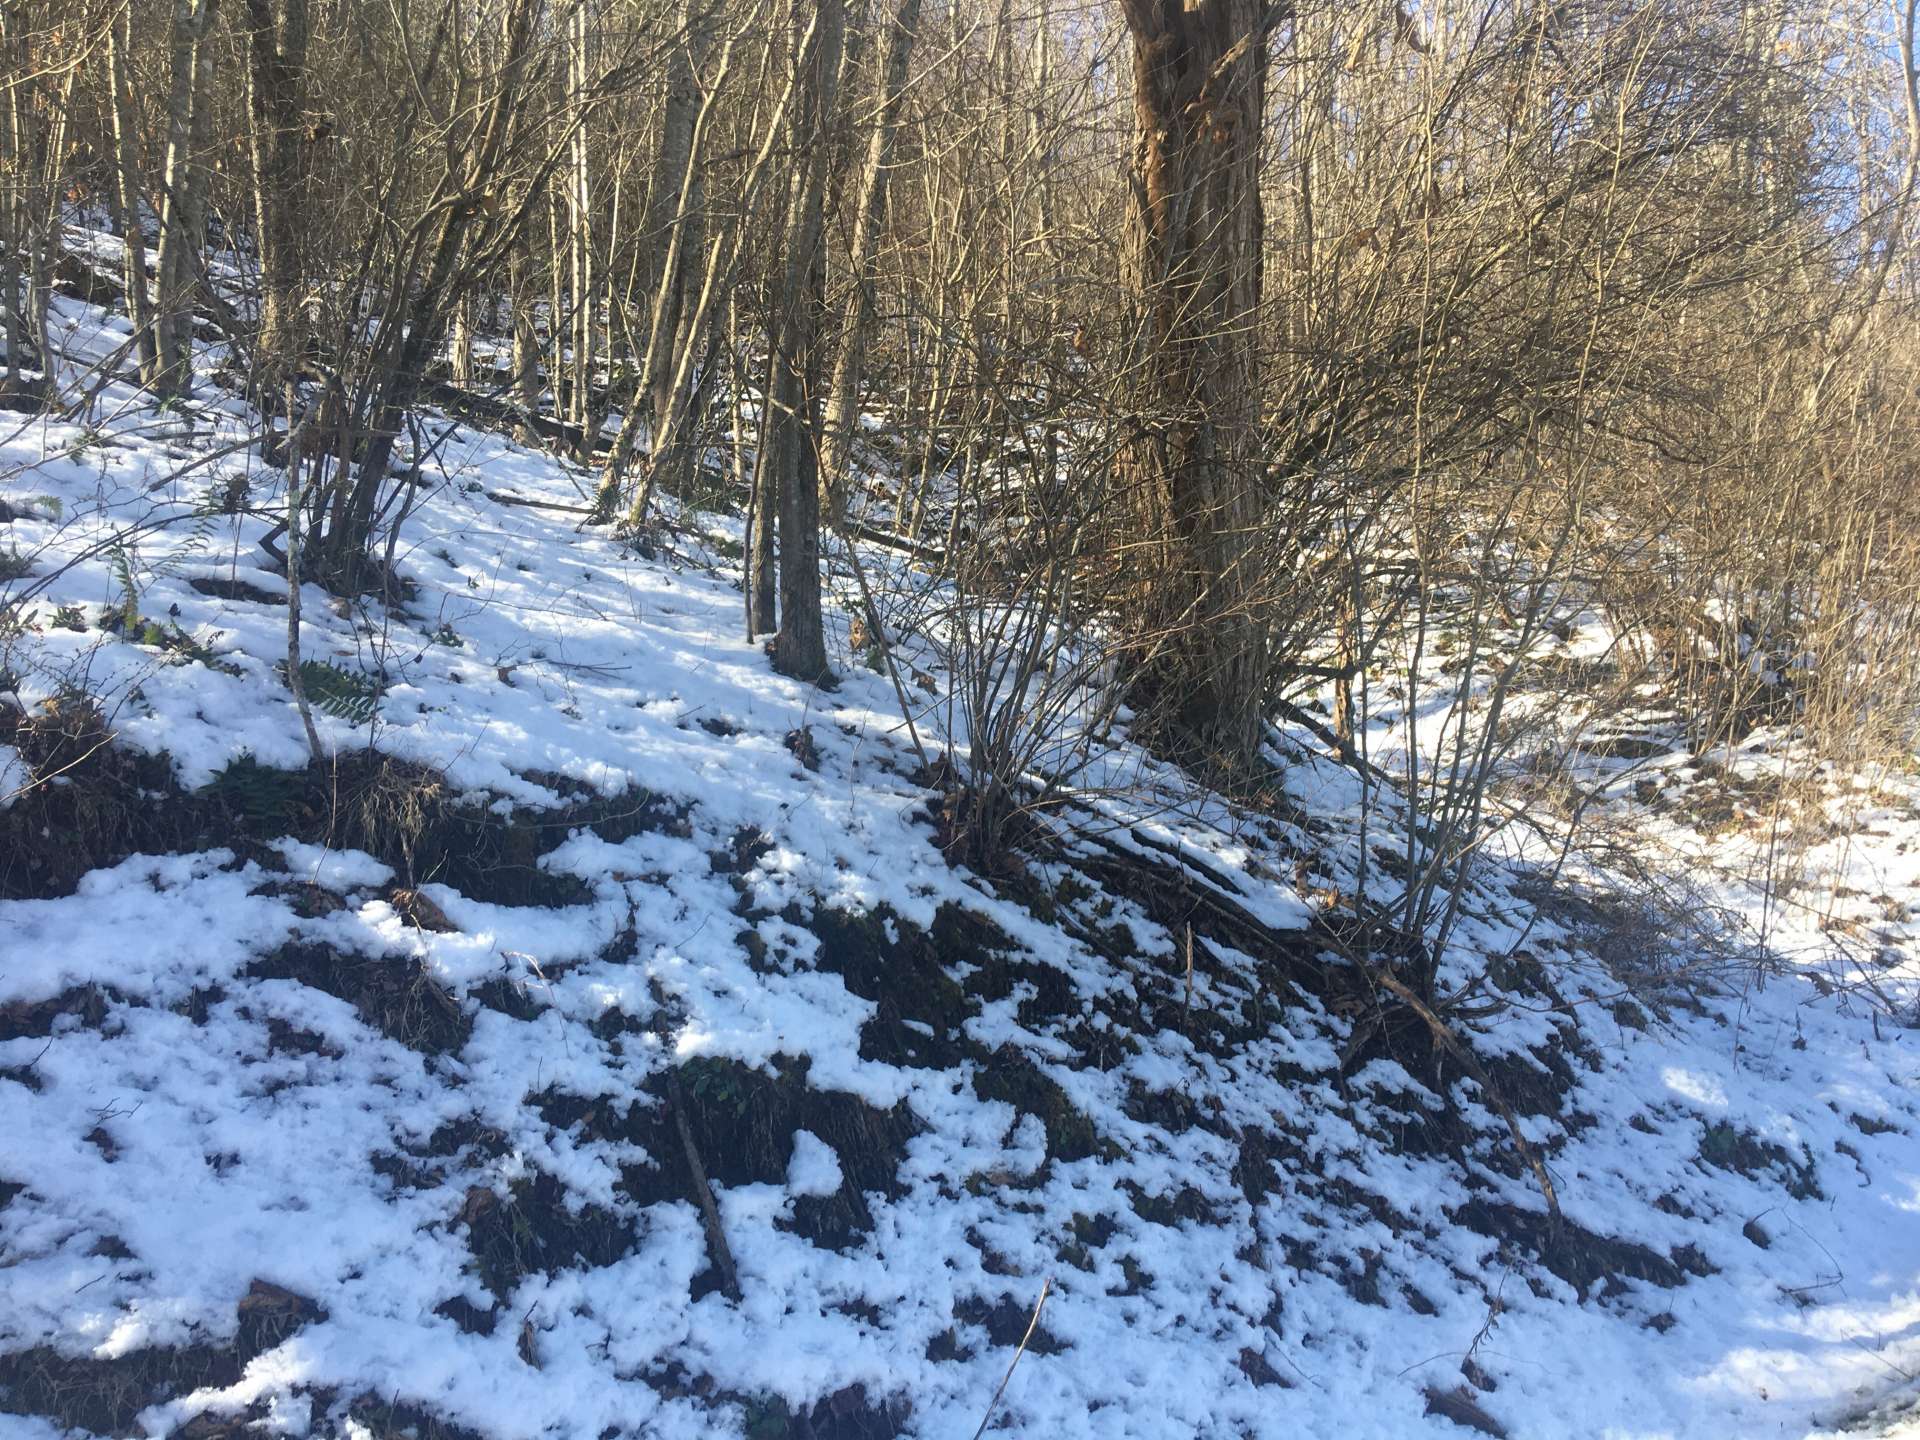 This 2.39 acre homesite is a combination of 4 lots in River Knoll Estates, a well established river community  offering common river access in the Crumpler area of Ashe County for your river recreation.